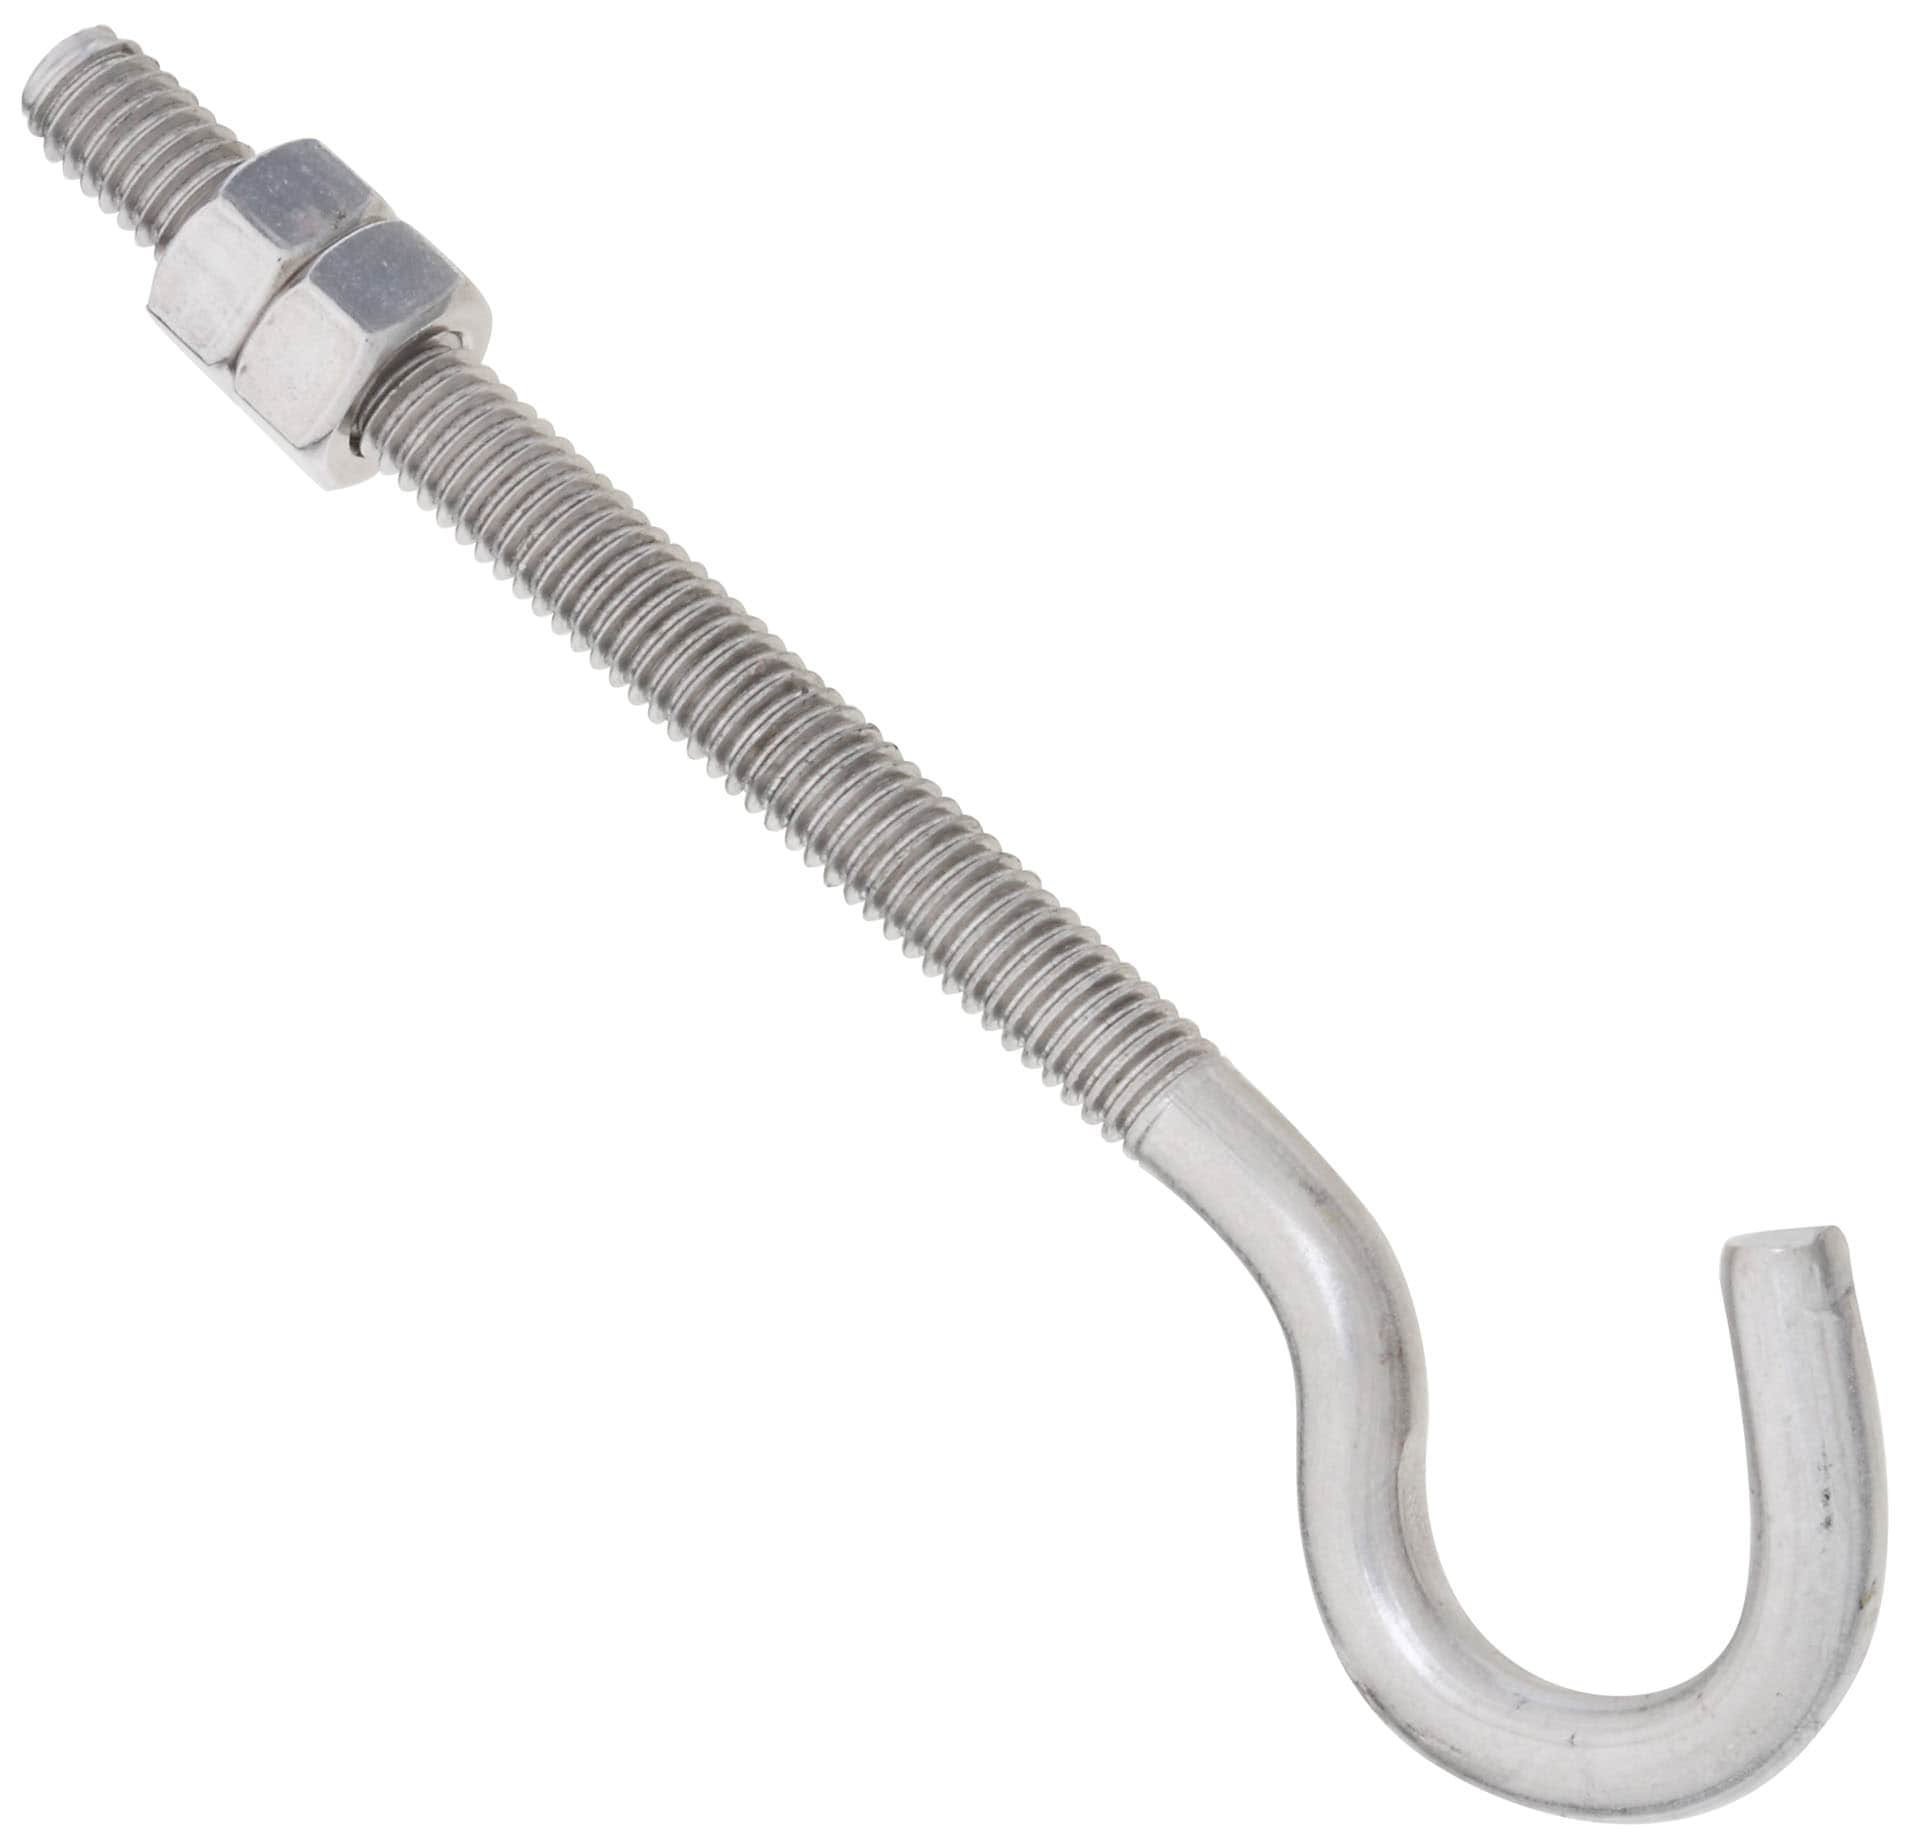 National 1-1/2 In. Stainless Steel Cup Hook - Jerry's Do it Best Hardware